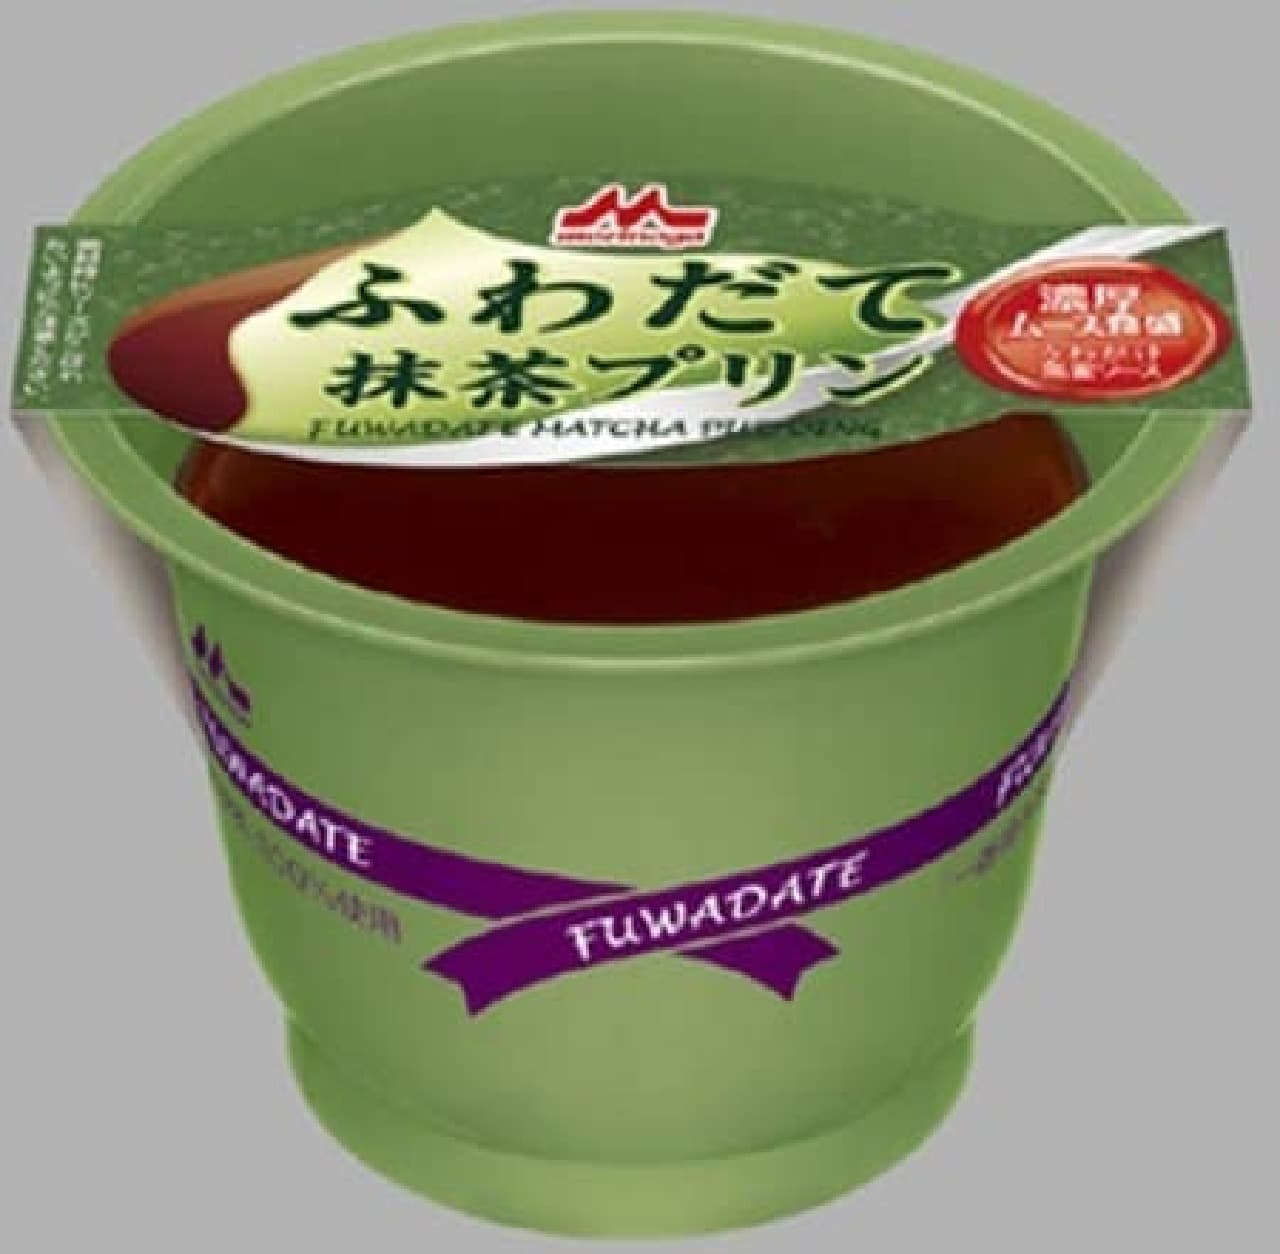 "Morinaga Fuwadate Matcha Pudding" where you can enjoy the "texture of only bubbles"